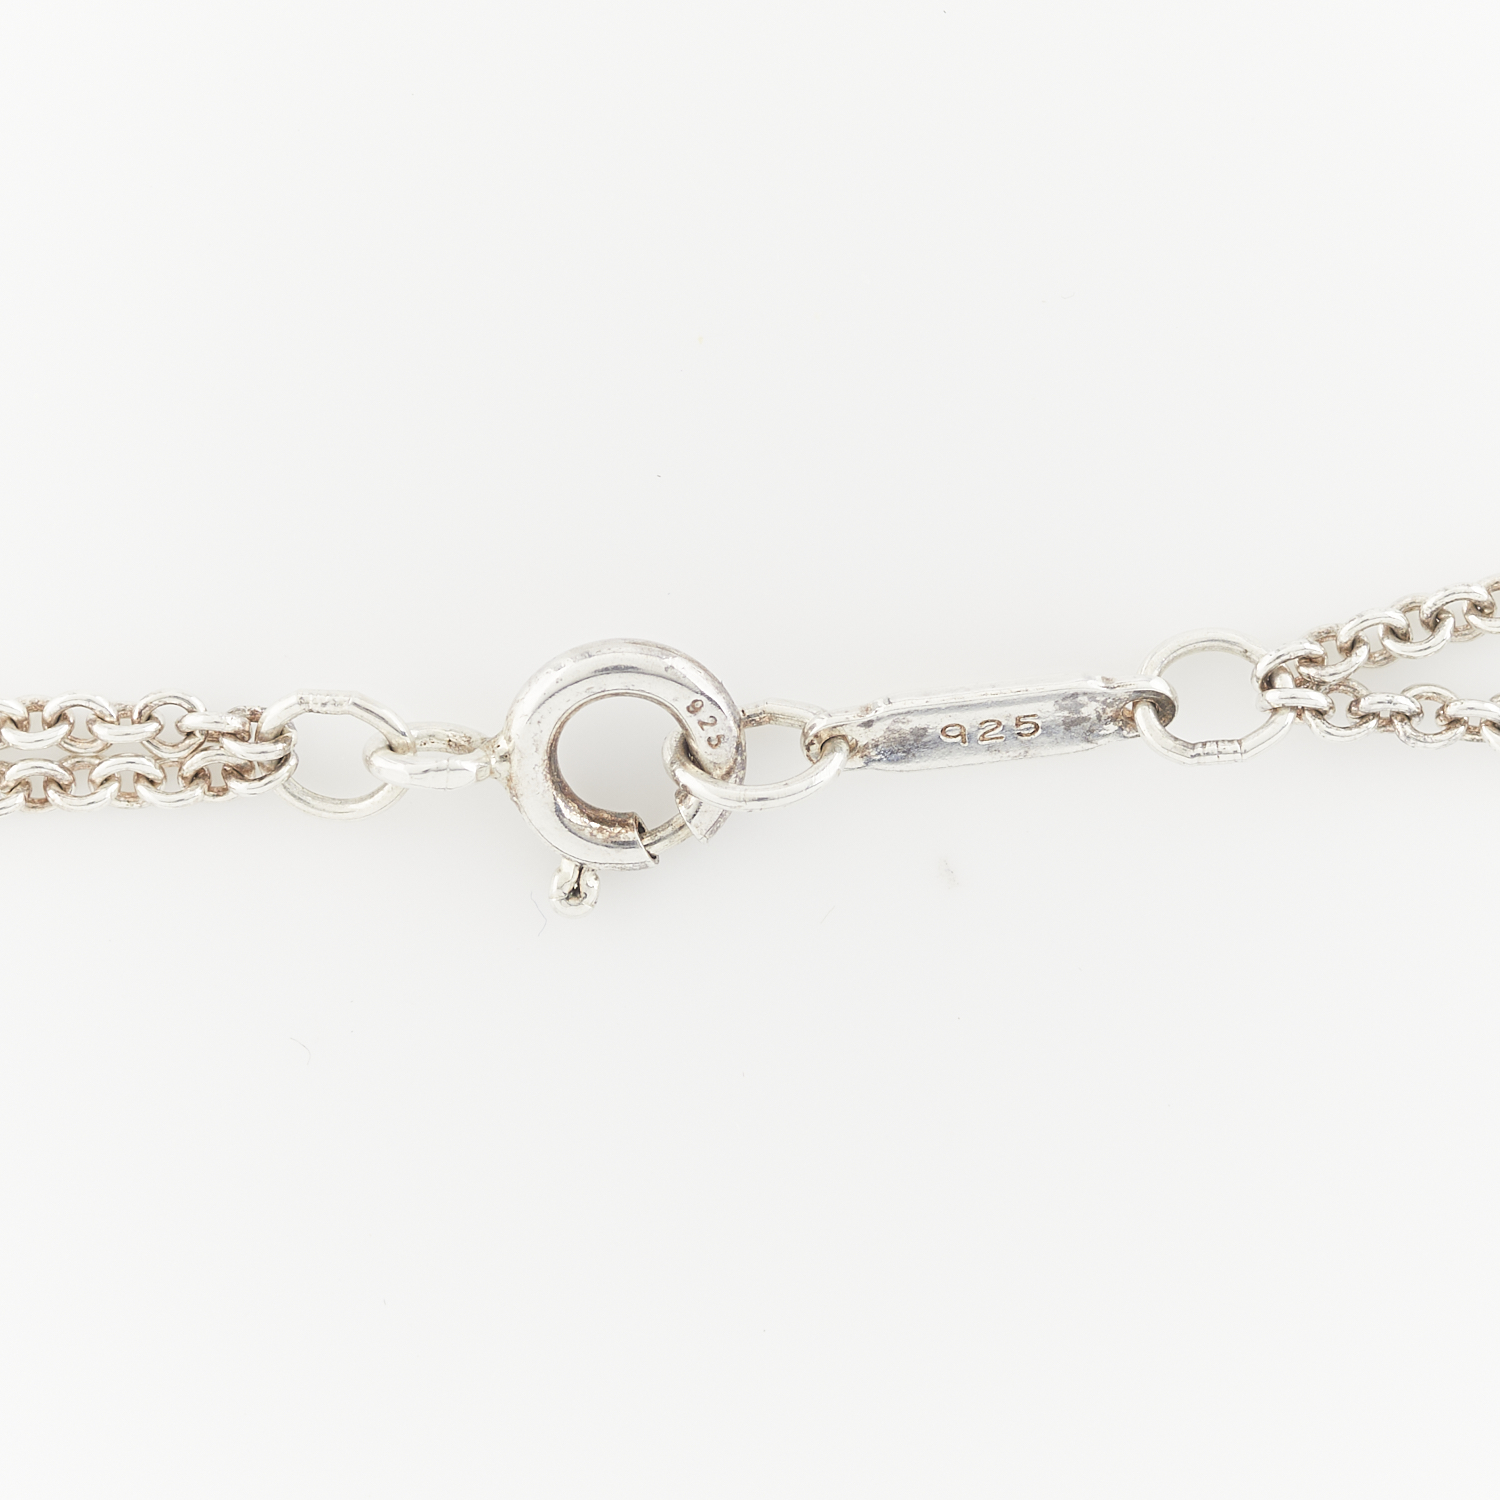 Tiffany & Co. Infinity Necklace - Image 7 of 8